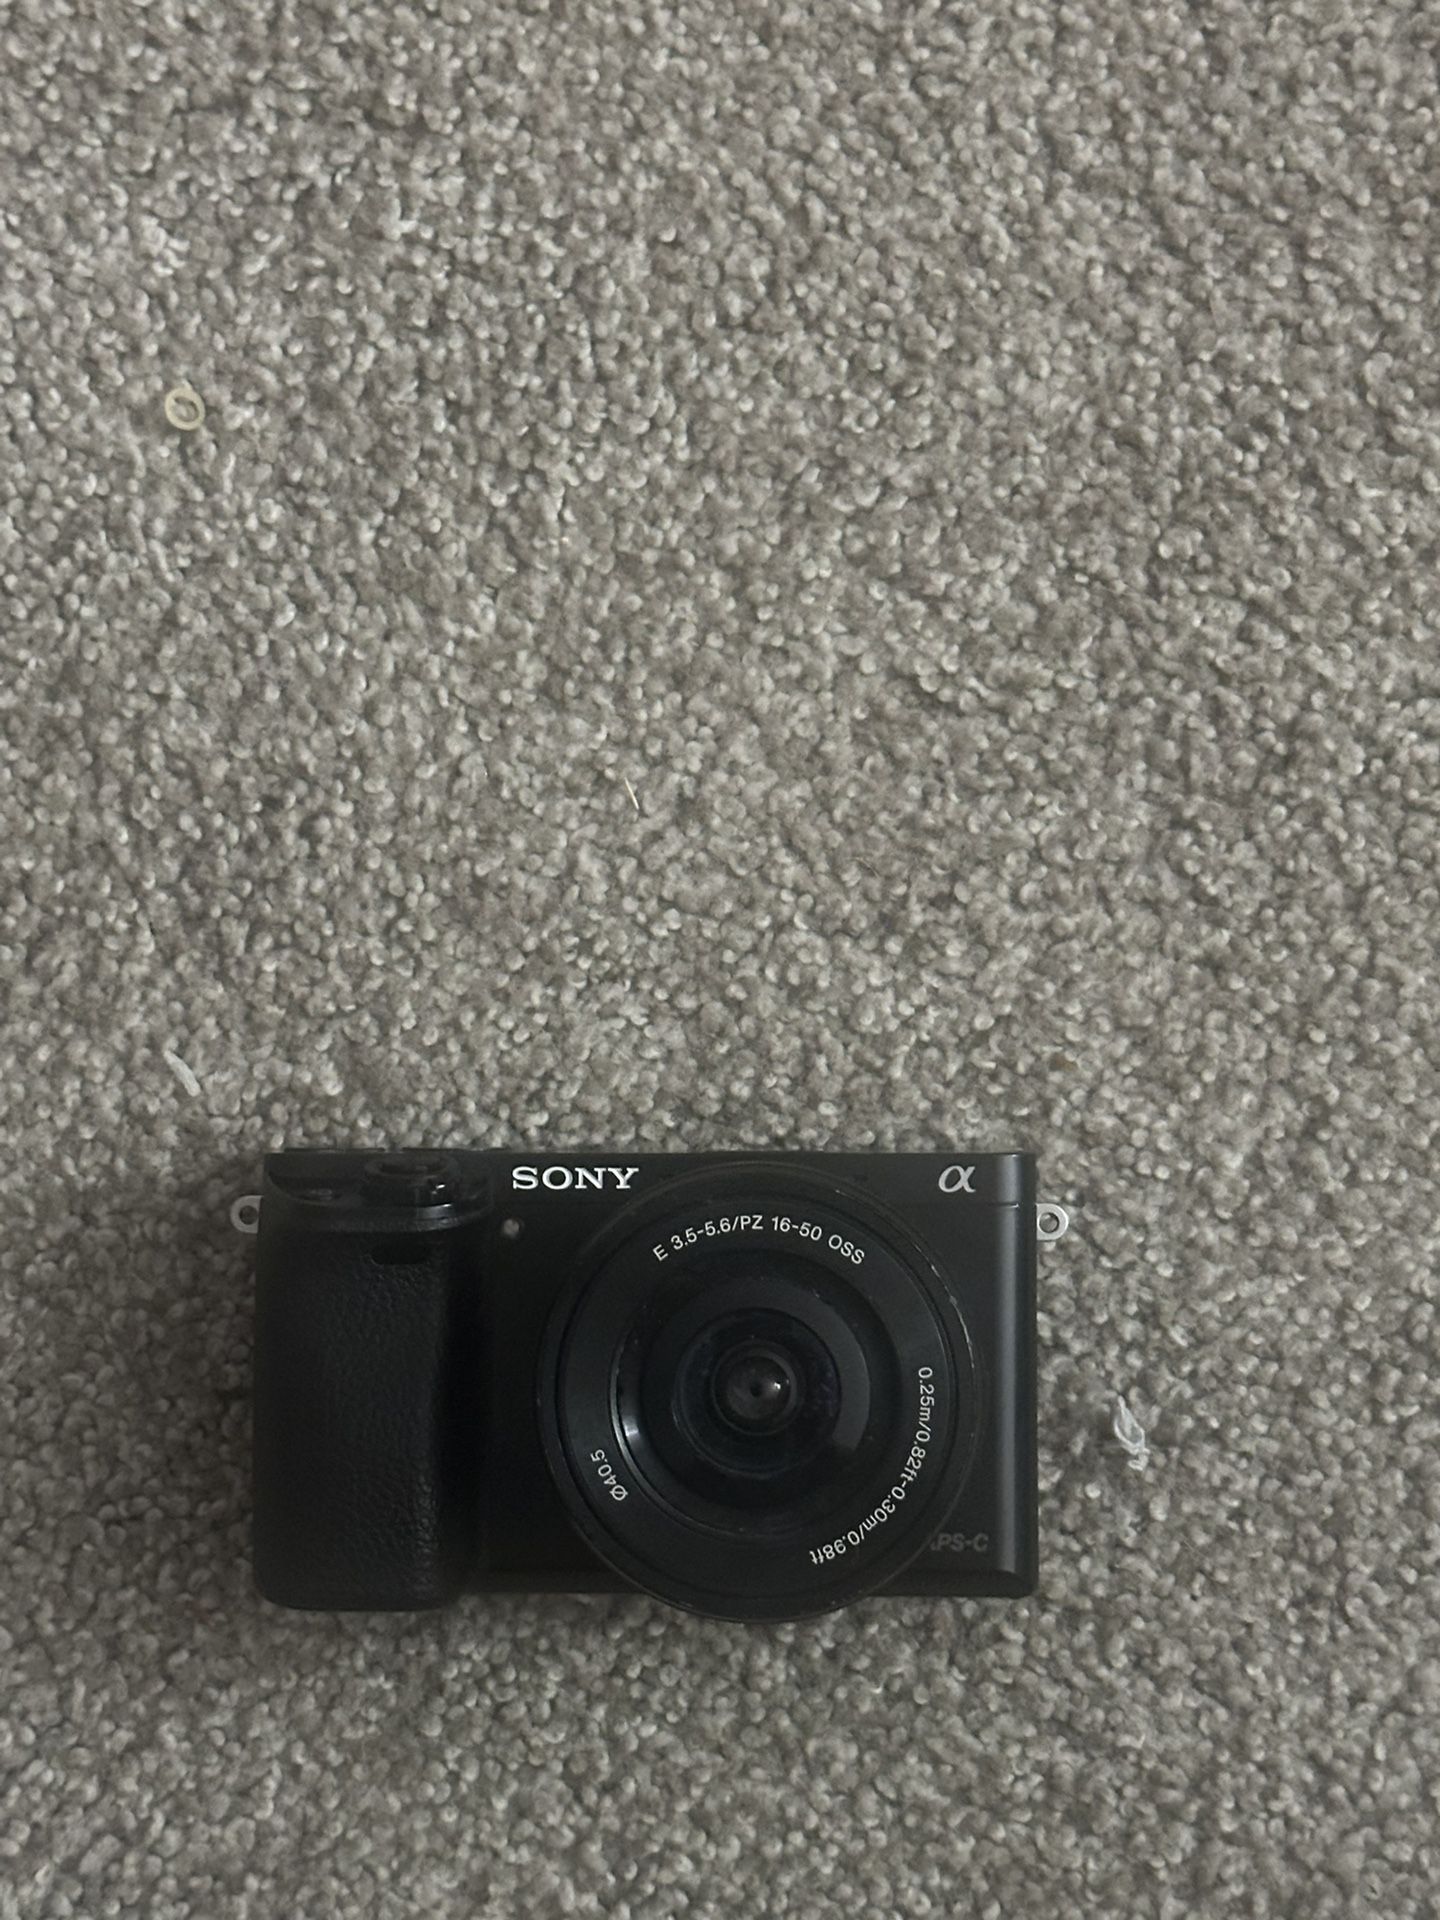 Sony A6000 With Lens and Attachments 